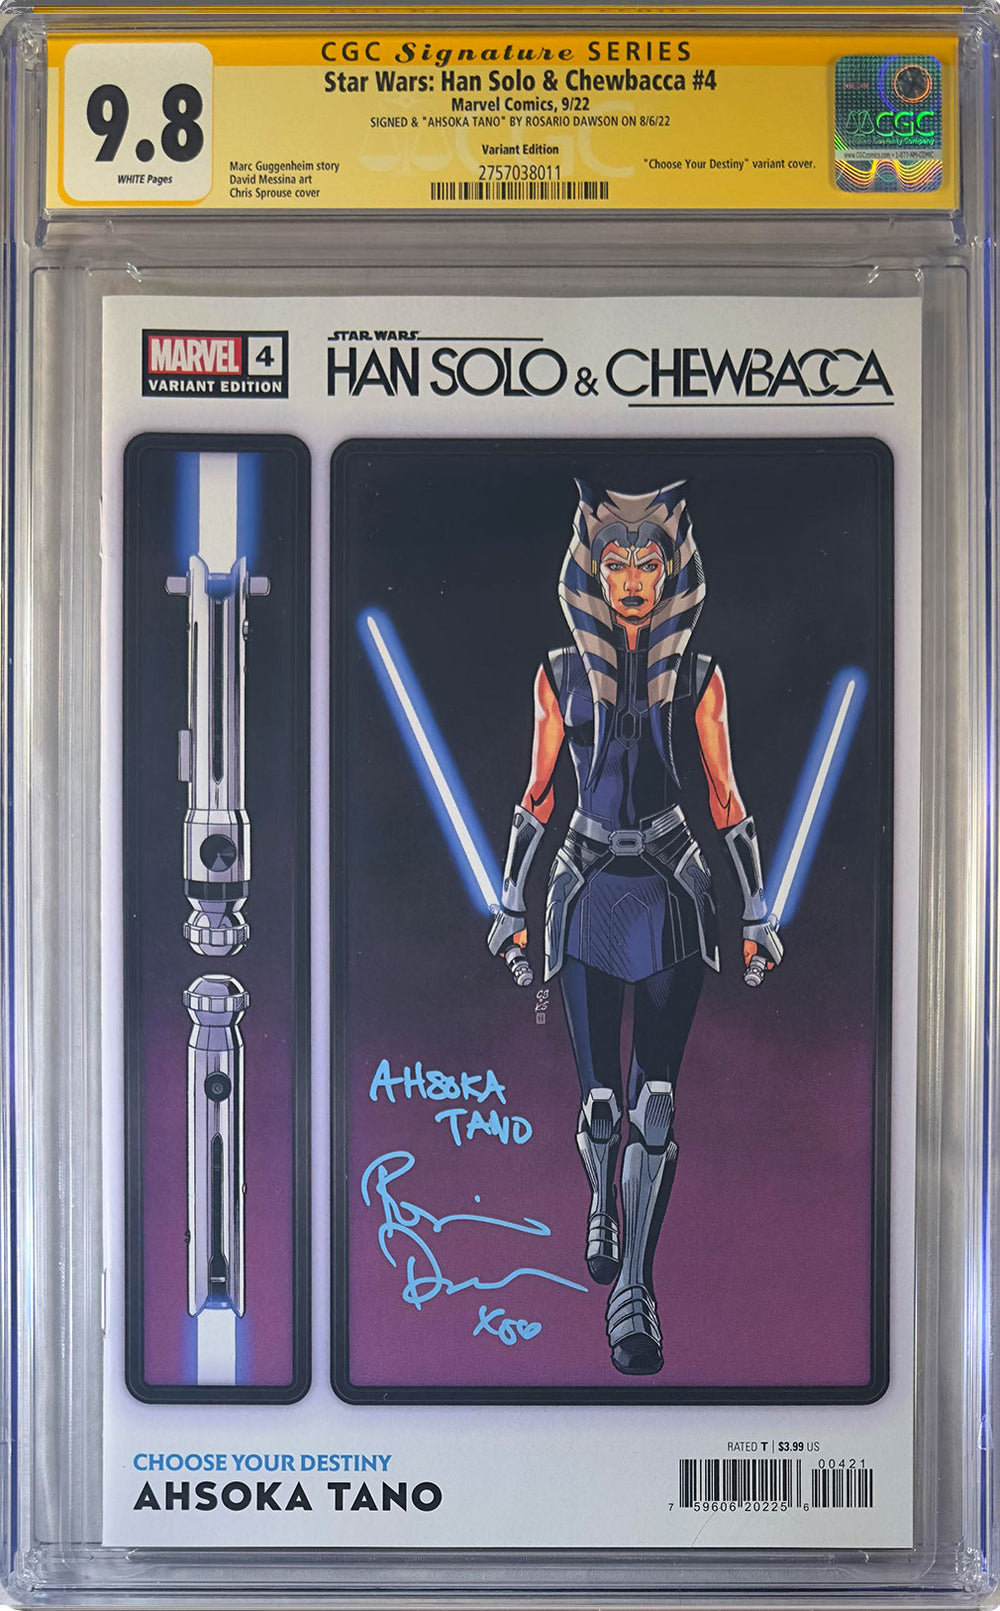 Star Wars: Han Solo & Chewbacca #4 Variant CGC SS 9.8 Signed by Rosario Dawson